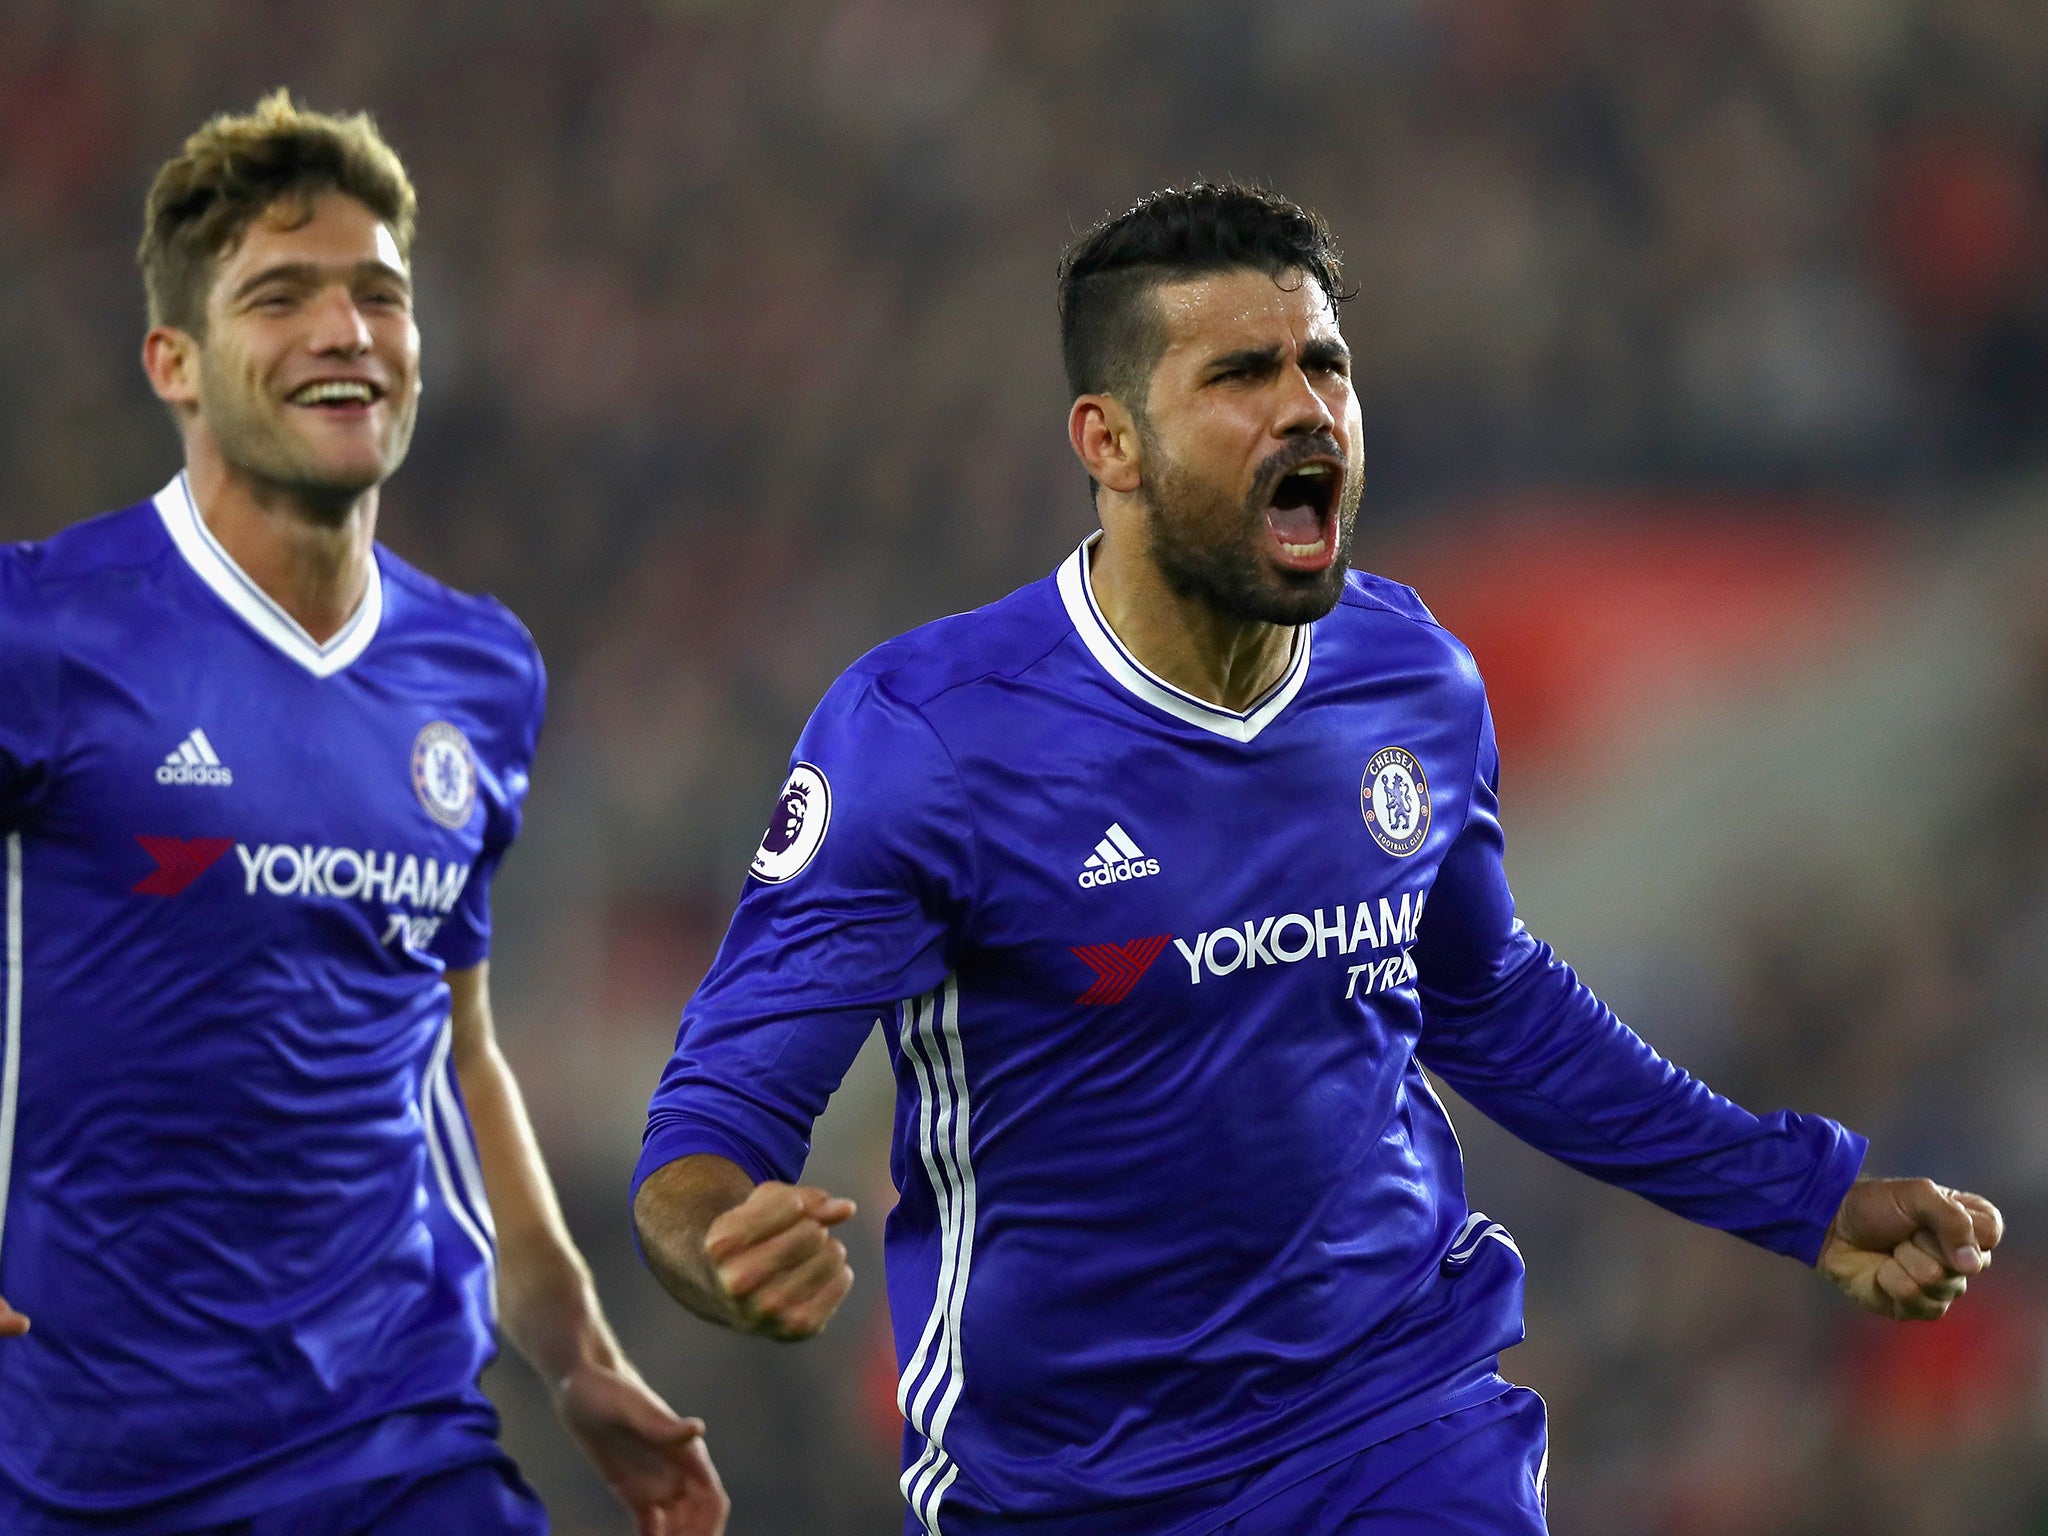 Costa wheels away in celebration after scoring Chelsea's second